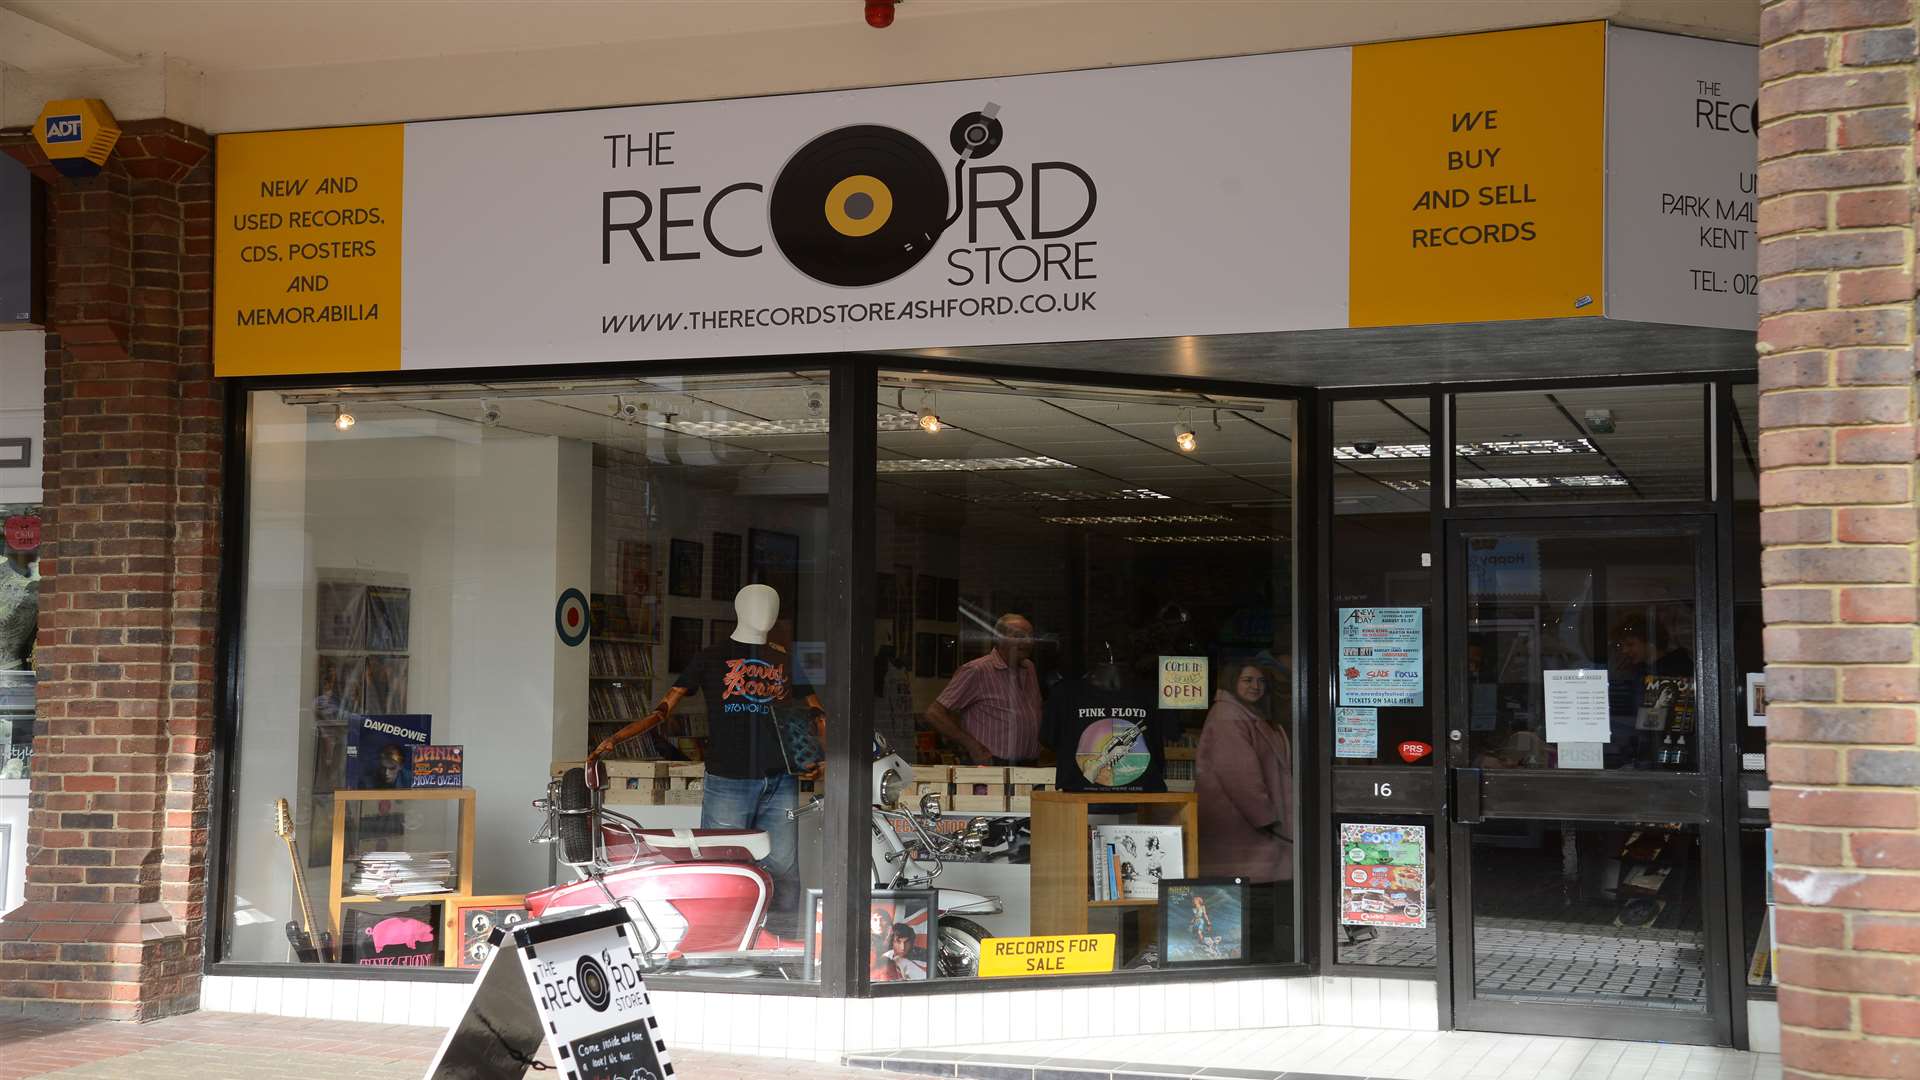 The Record Store is a family run business